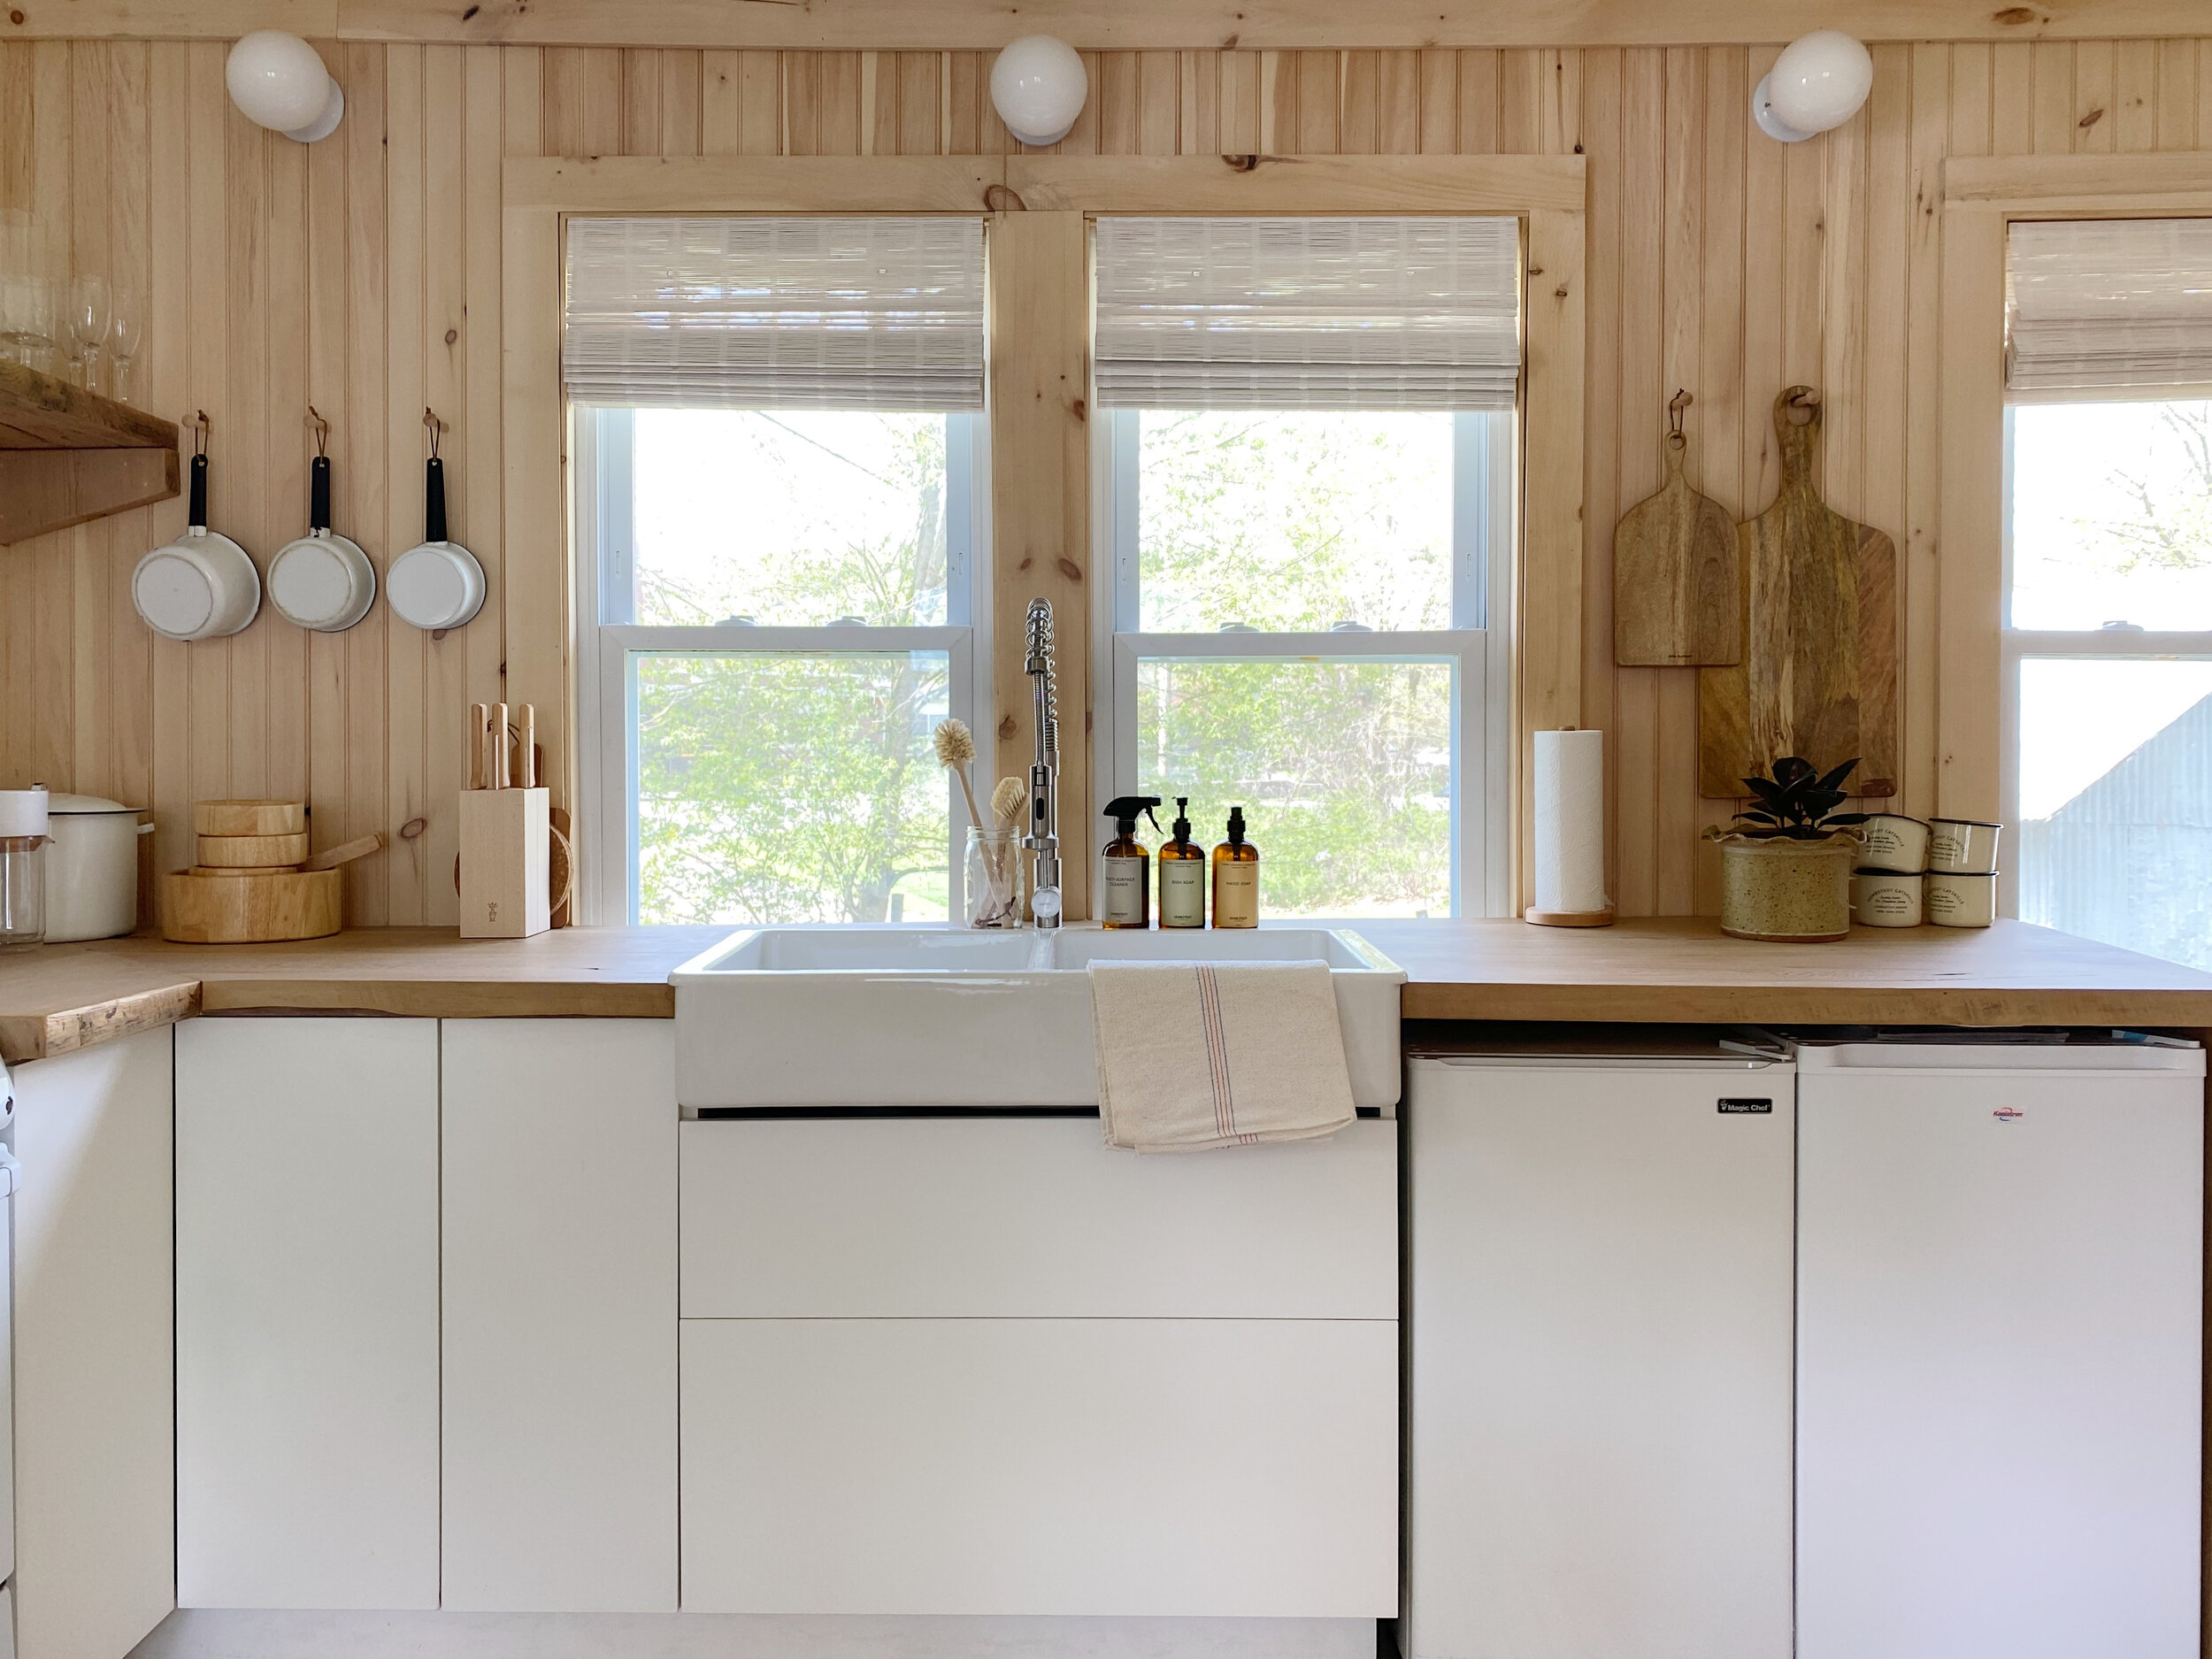 the kitchen is designed with plain white lower cabinets, reclaimed wood counter 9